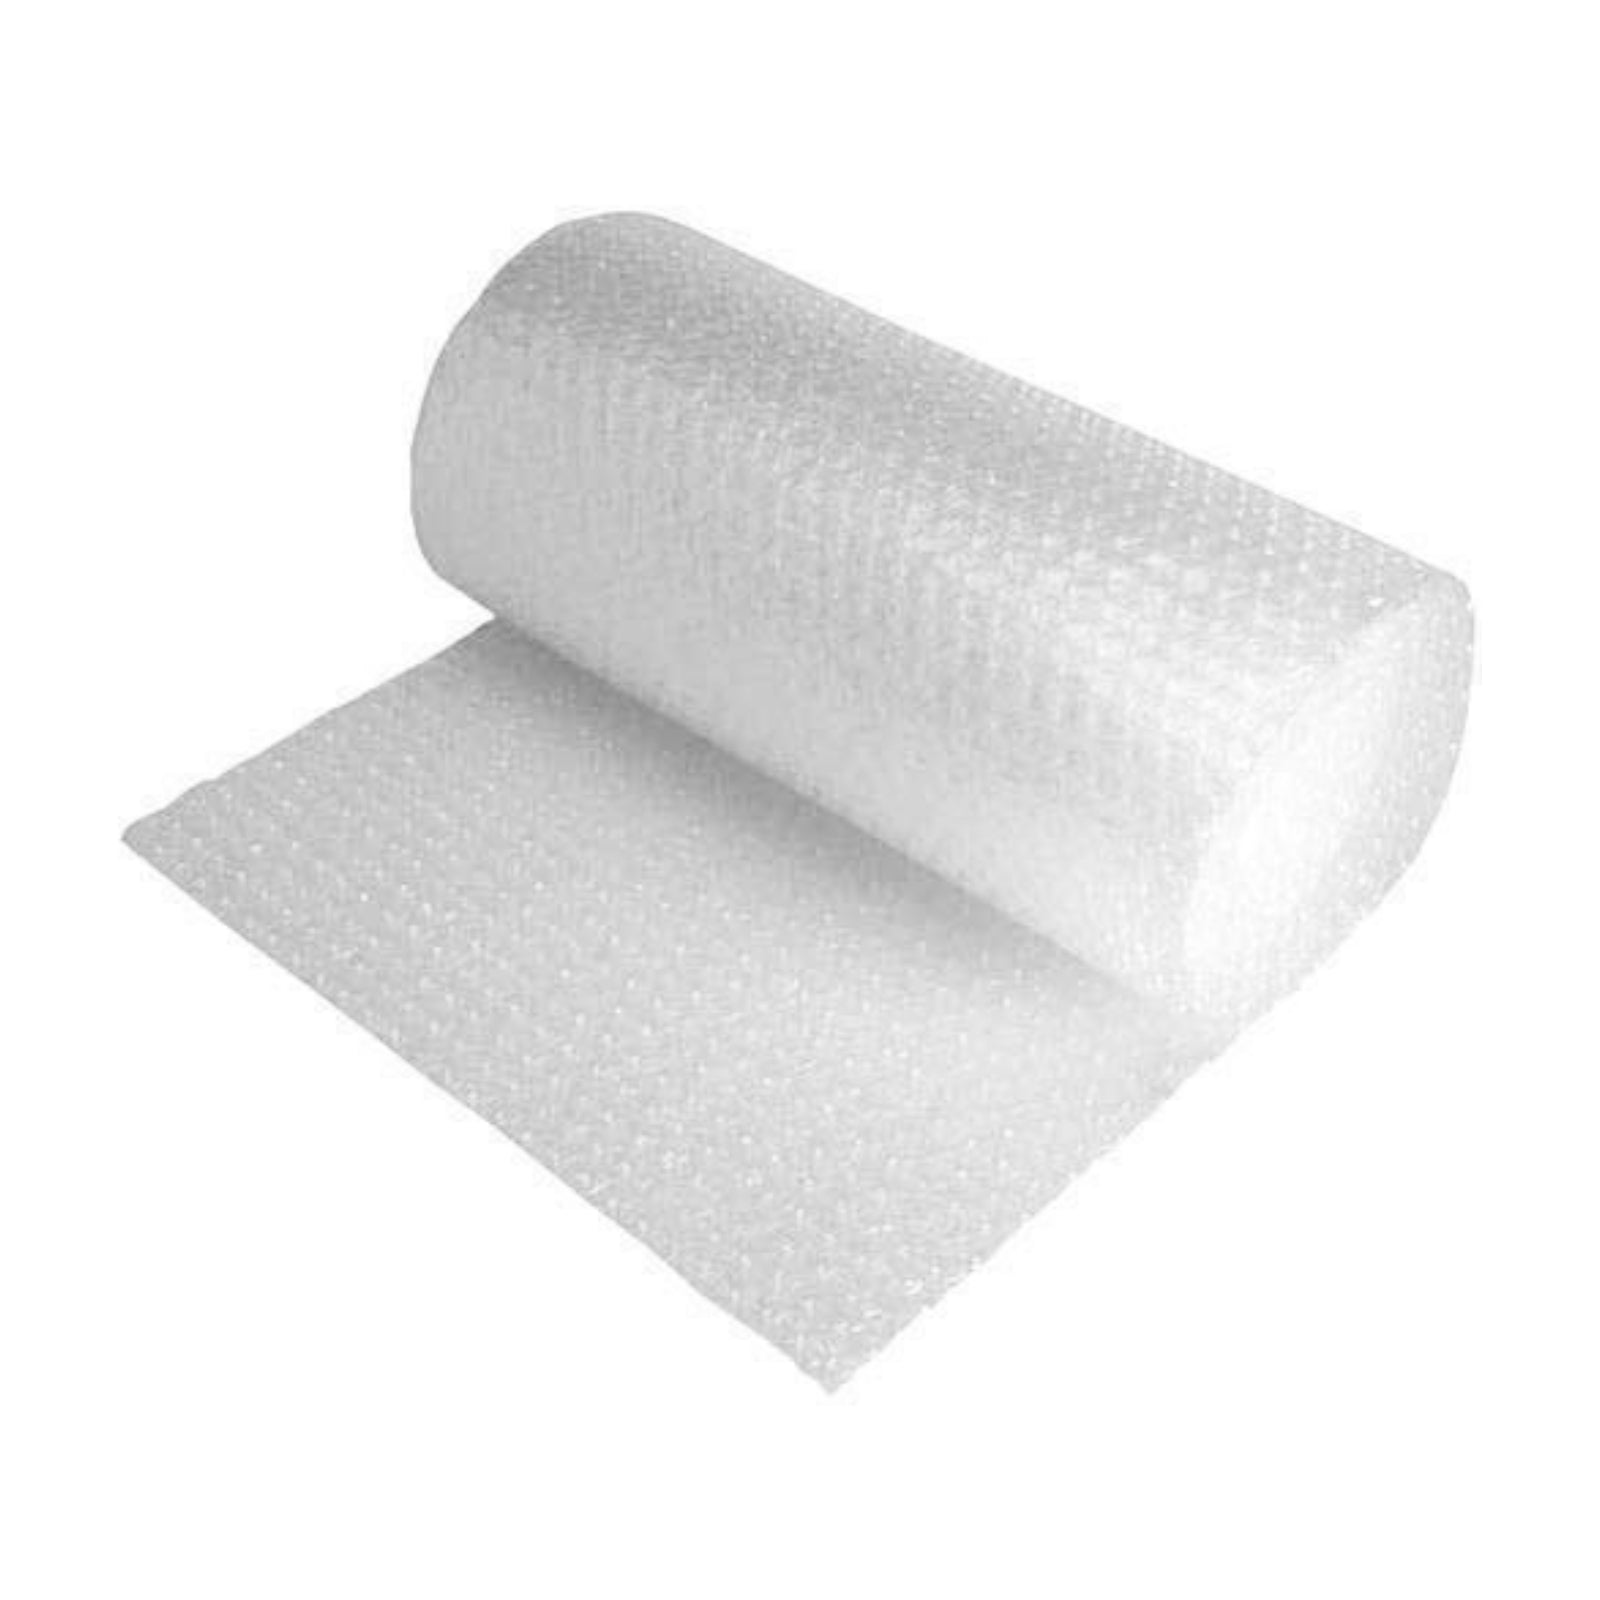 Thick Bubble Cushion Wrap Packing - Up to 20 Metres - Homeware Discounts